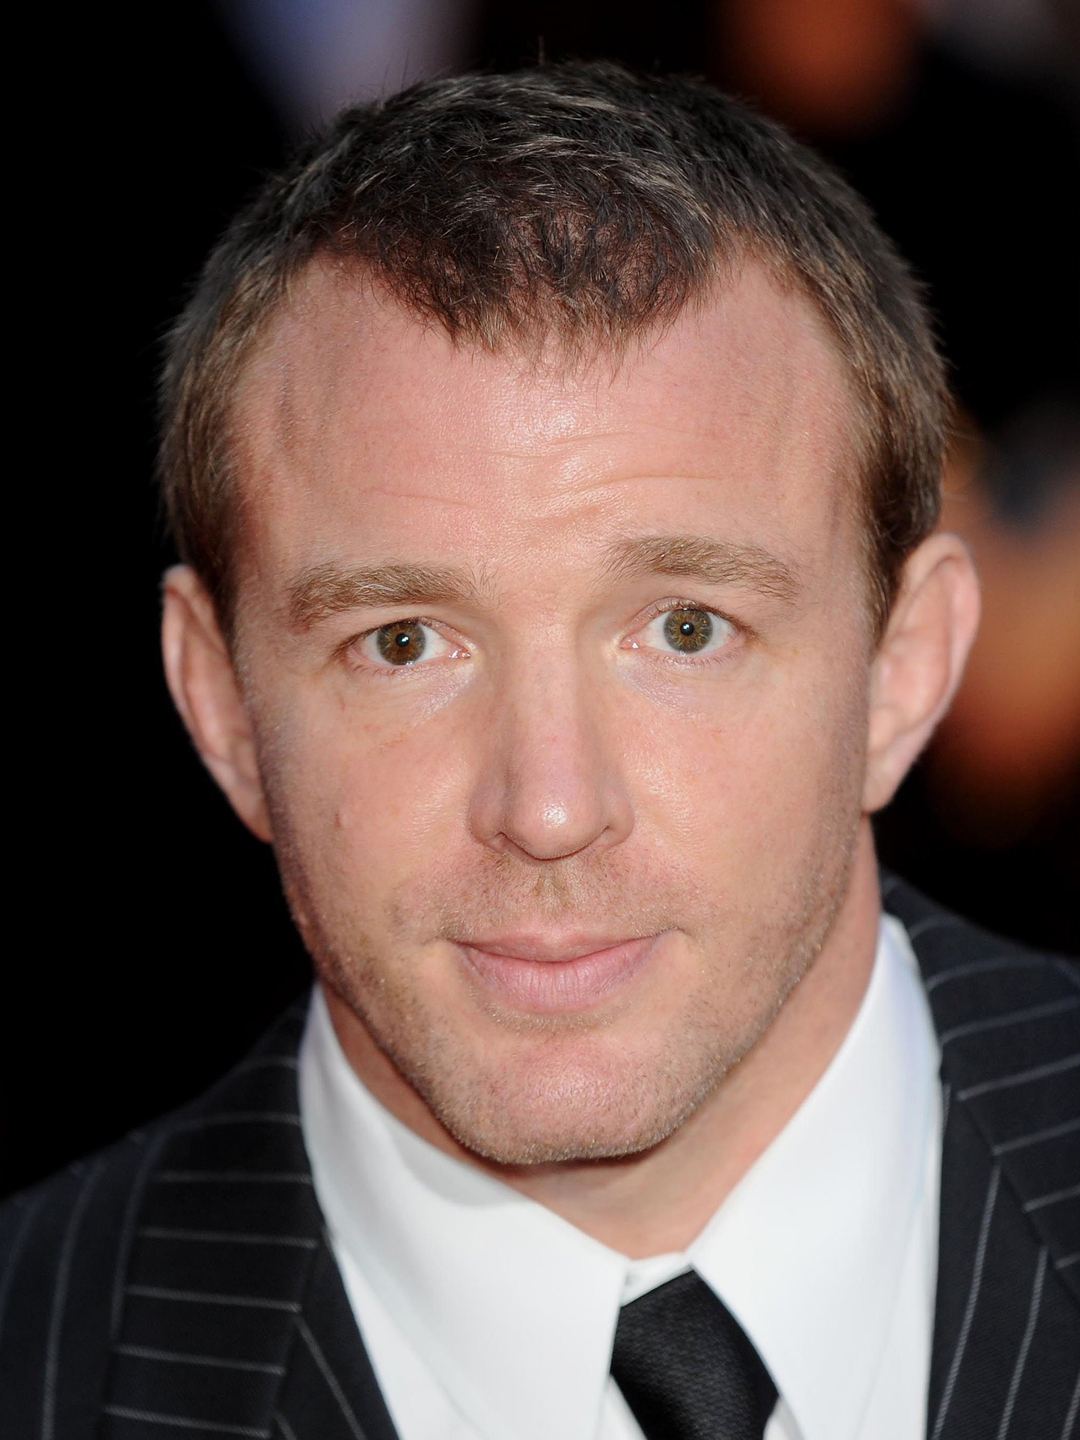 Guy Ritchie who is his mother